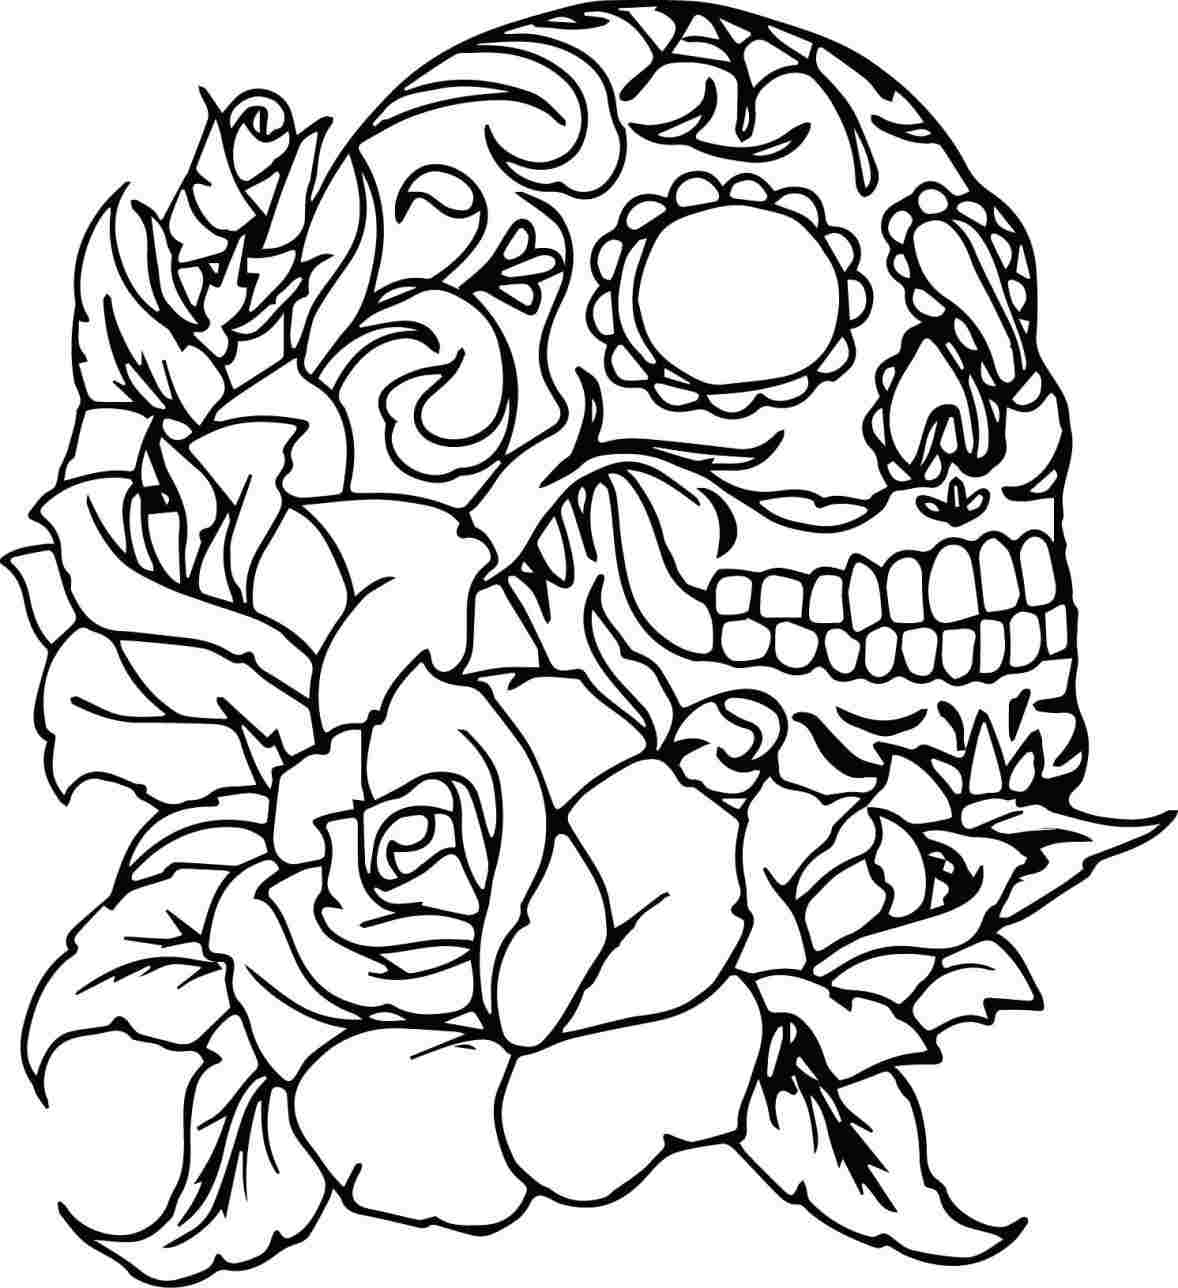 Skull And Rose Drawing Easy at